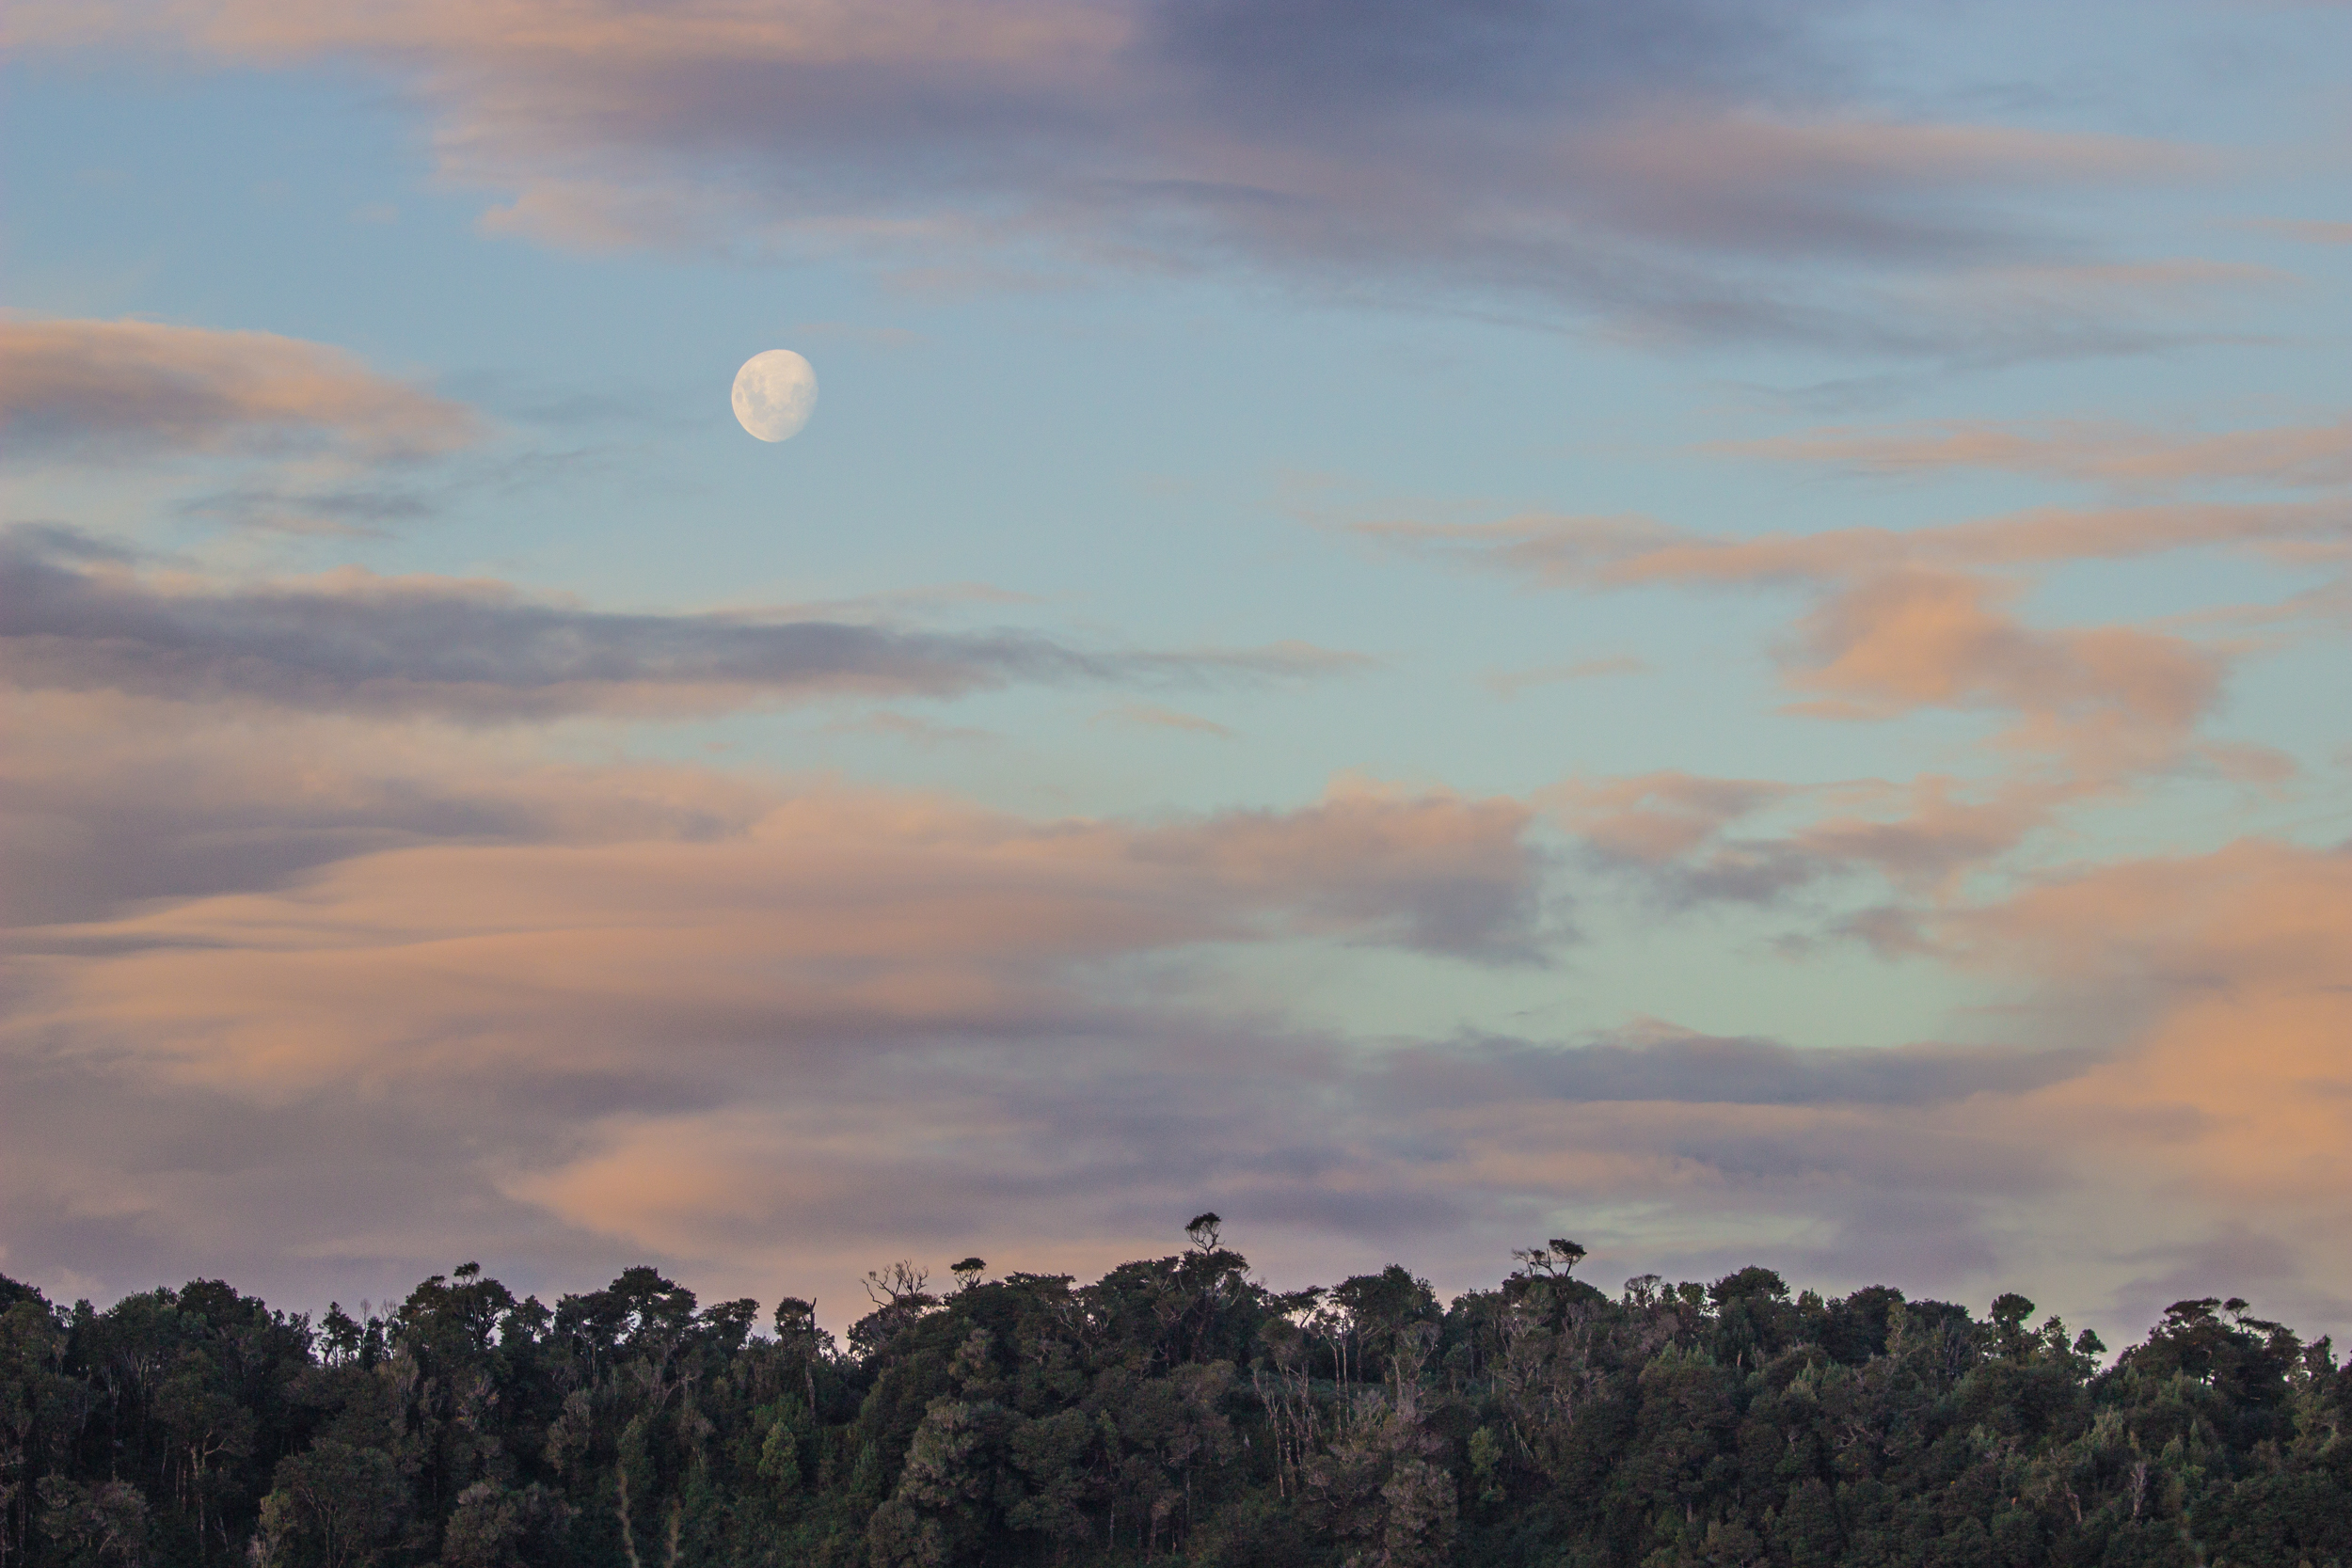 Sunset light and the moon seen from the lookout tower in Inío.